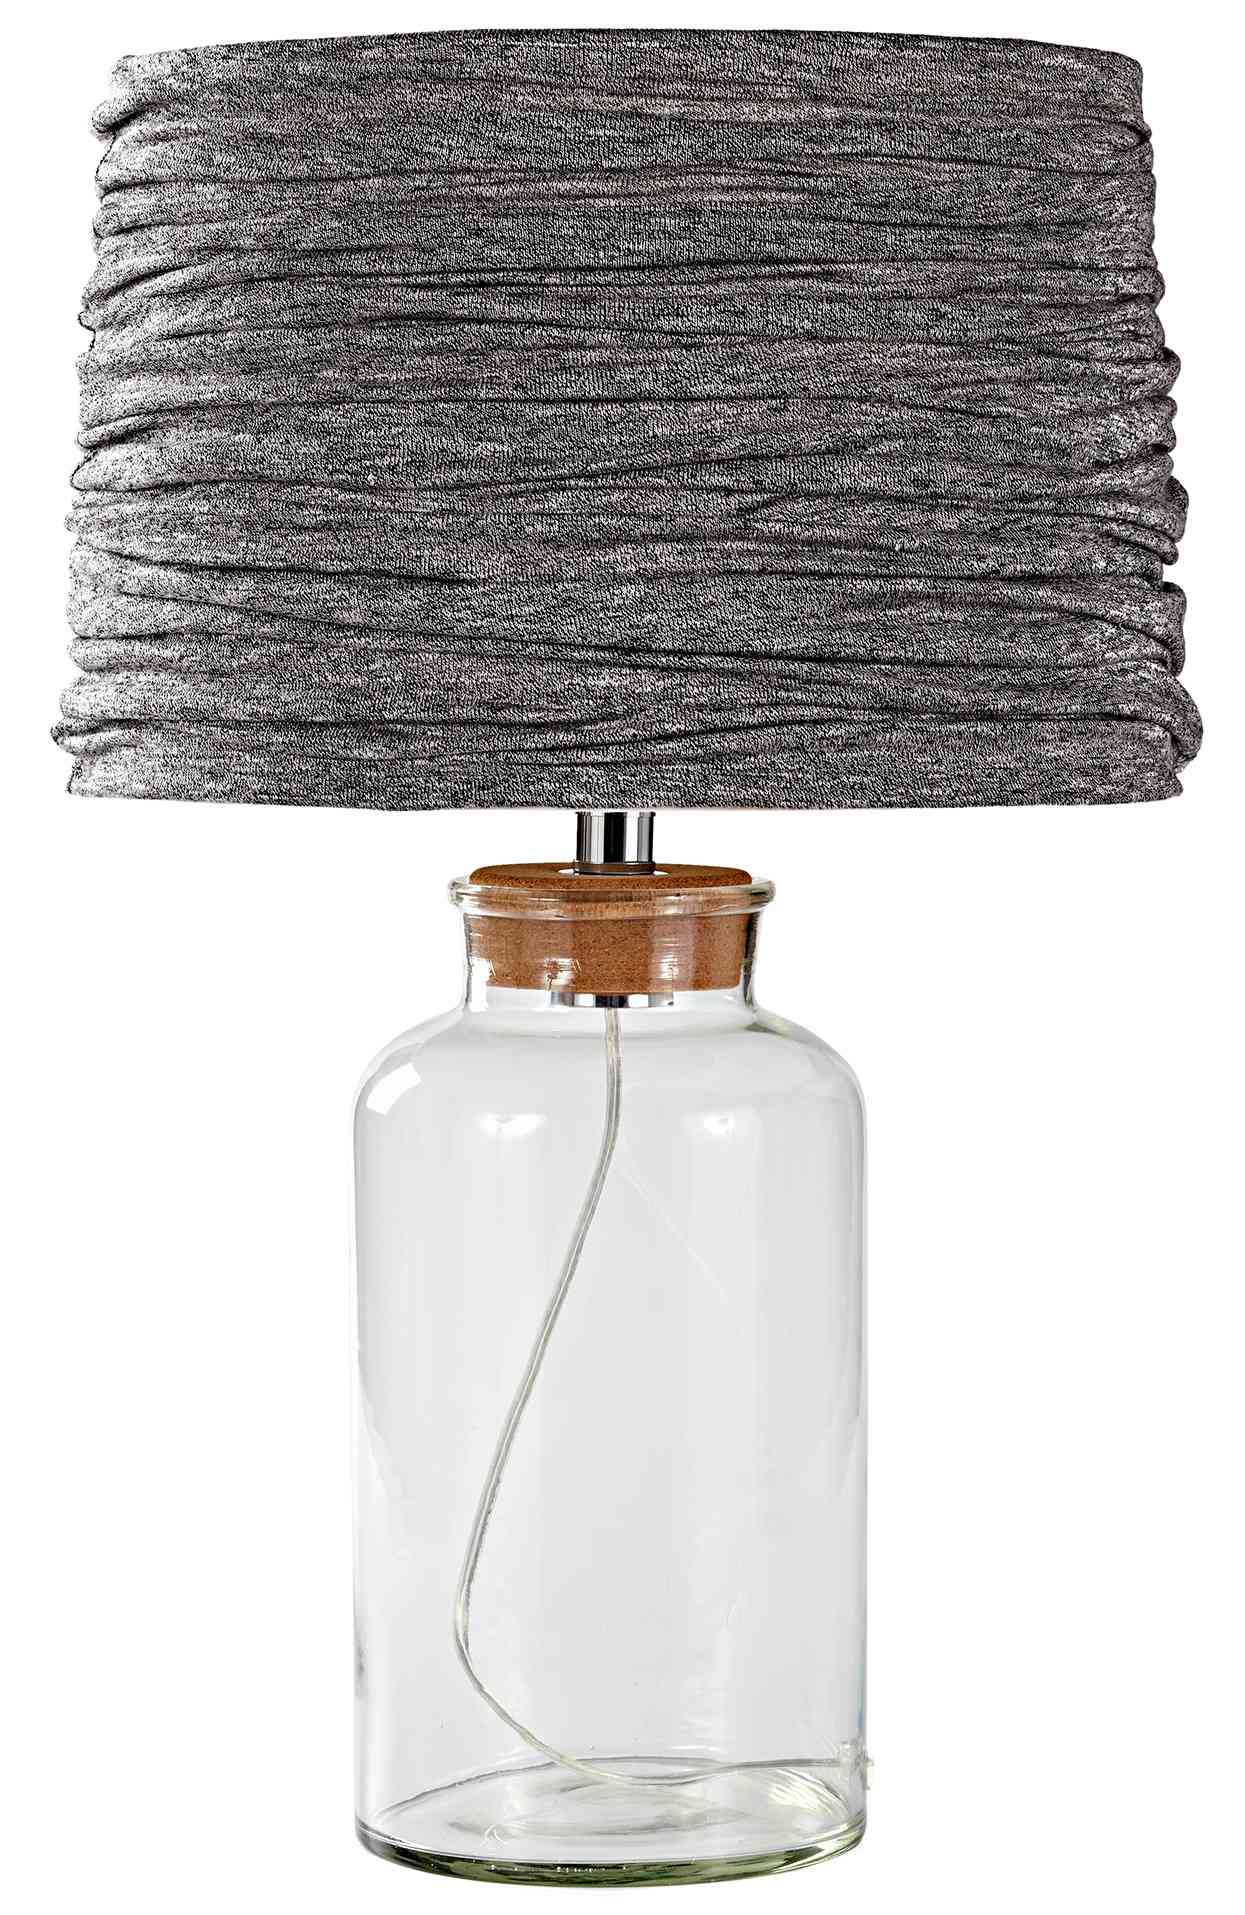 Creative Ways To Reinvent A Lampshade